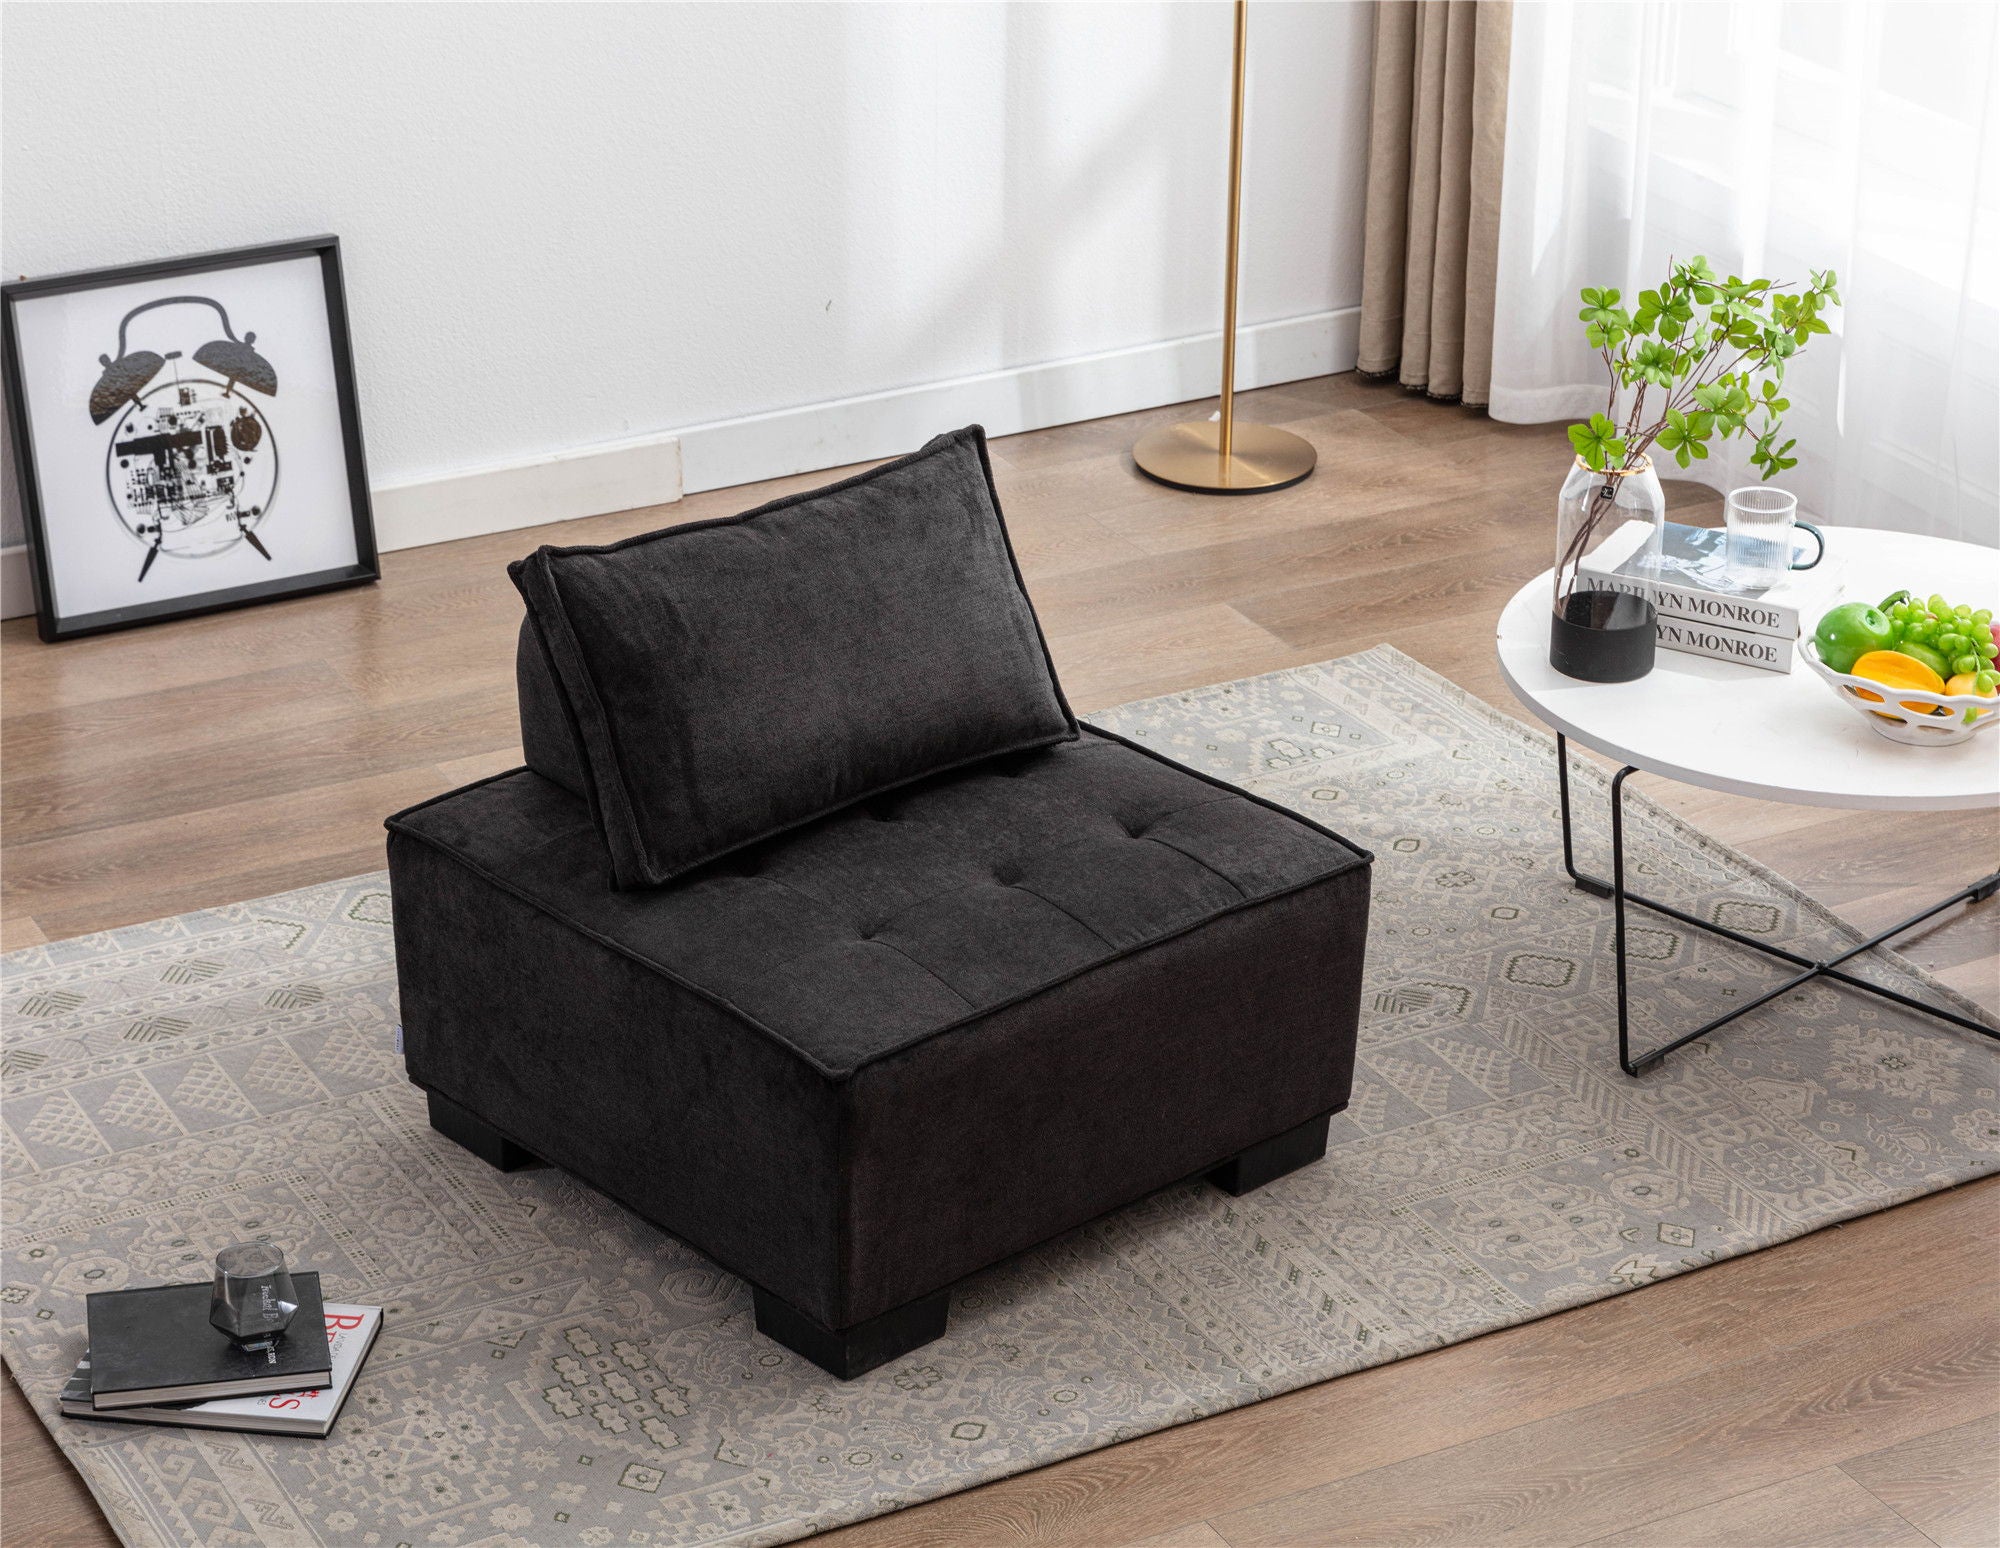 Coomore Ottoman / Lazy Chair - Black